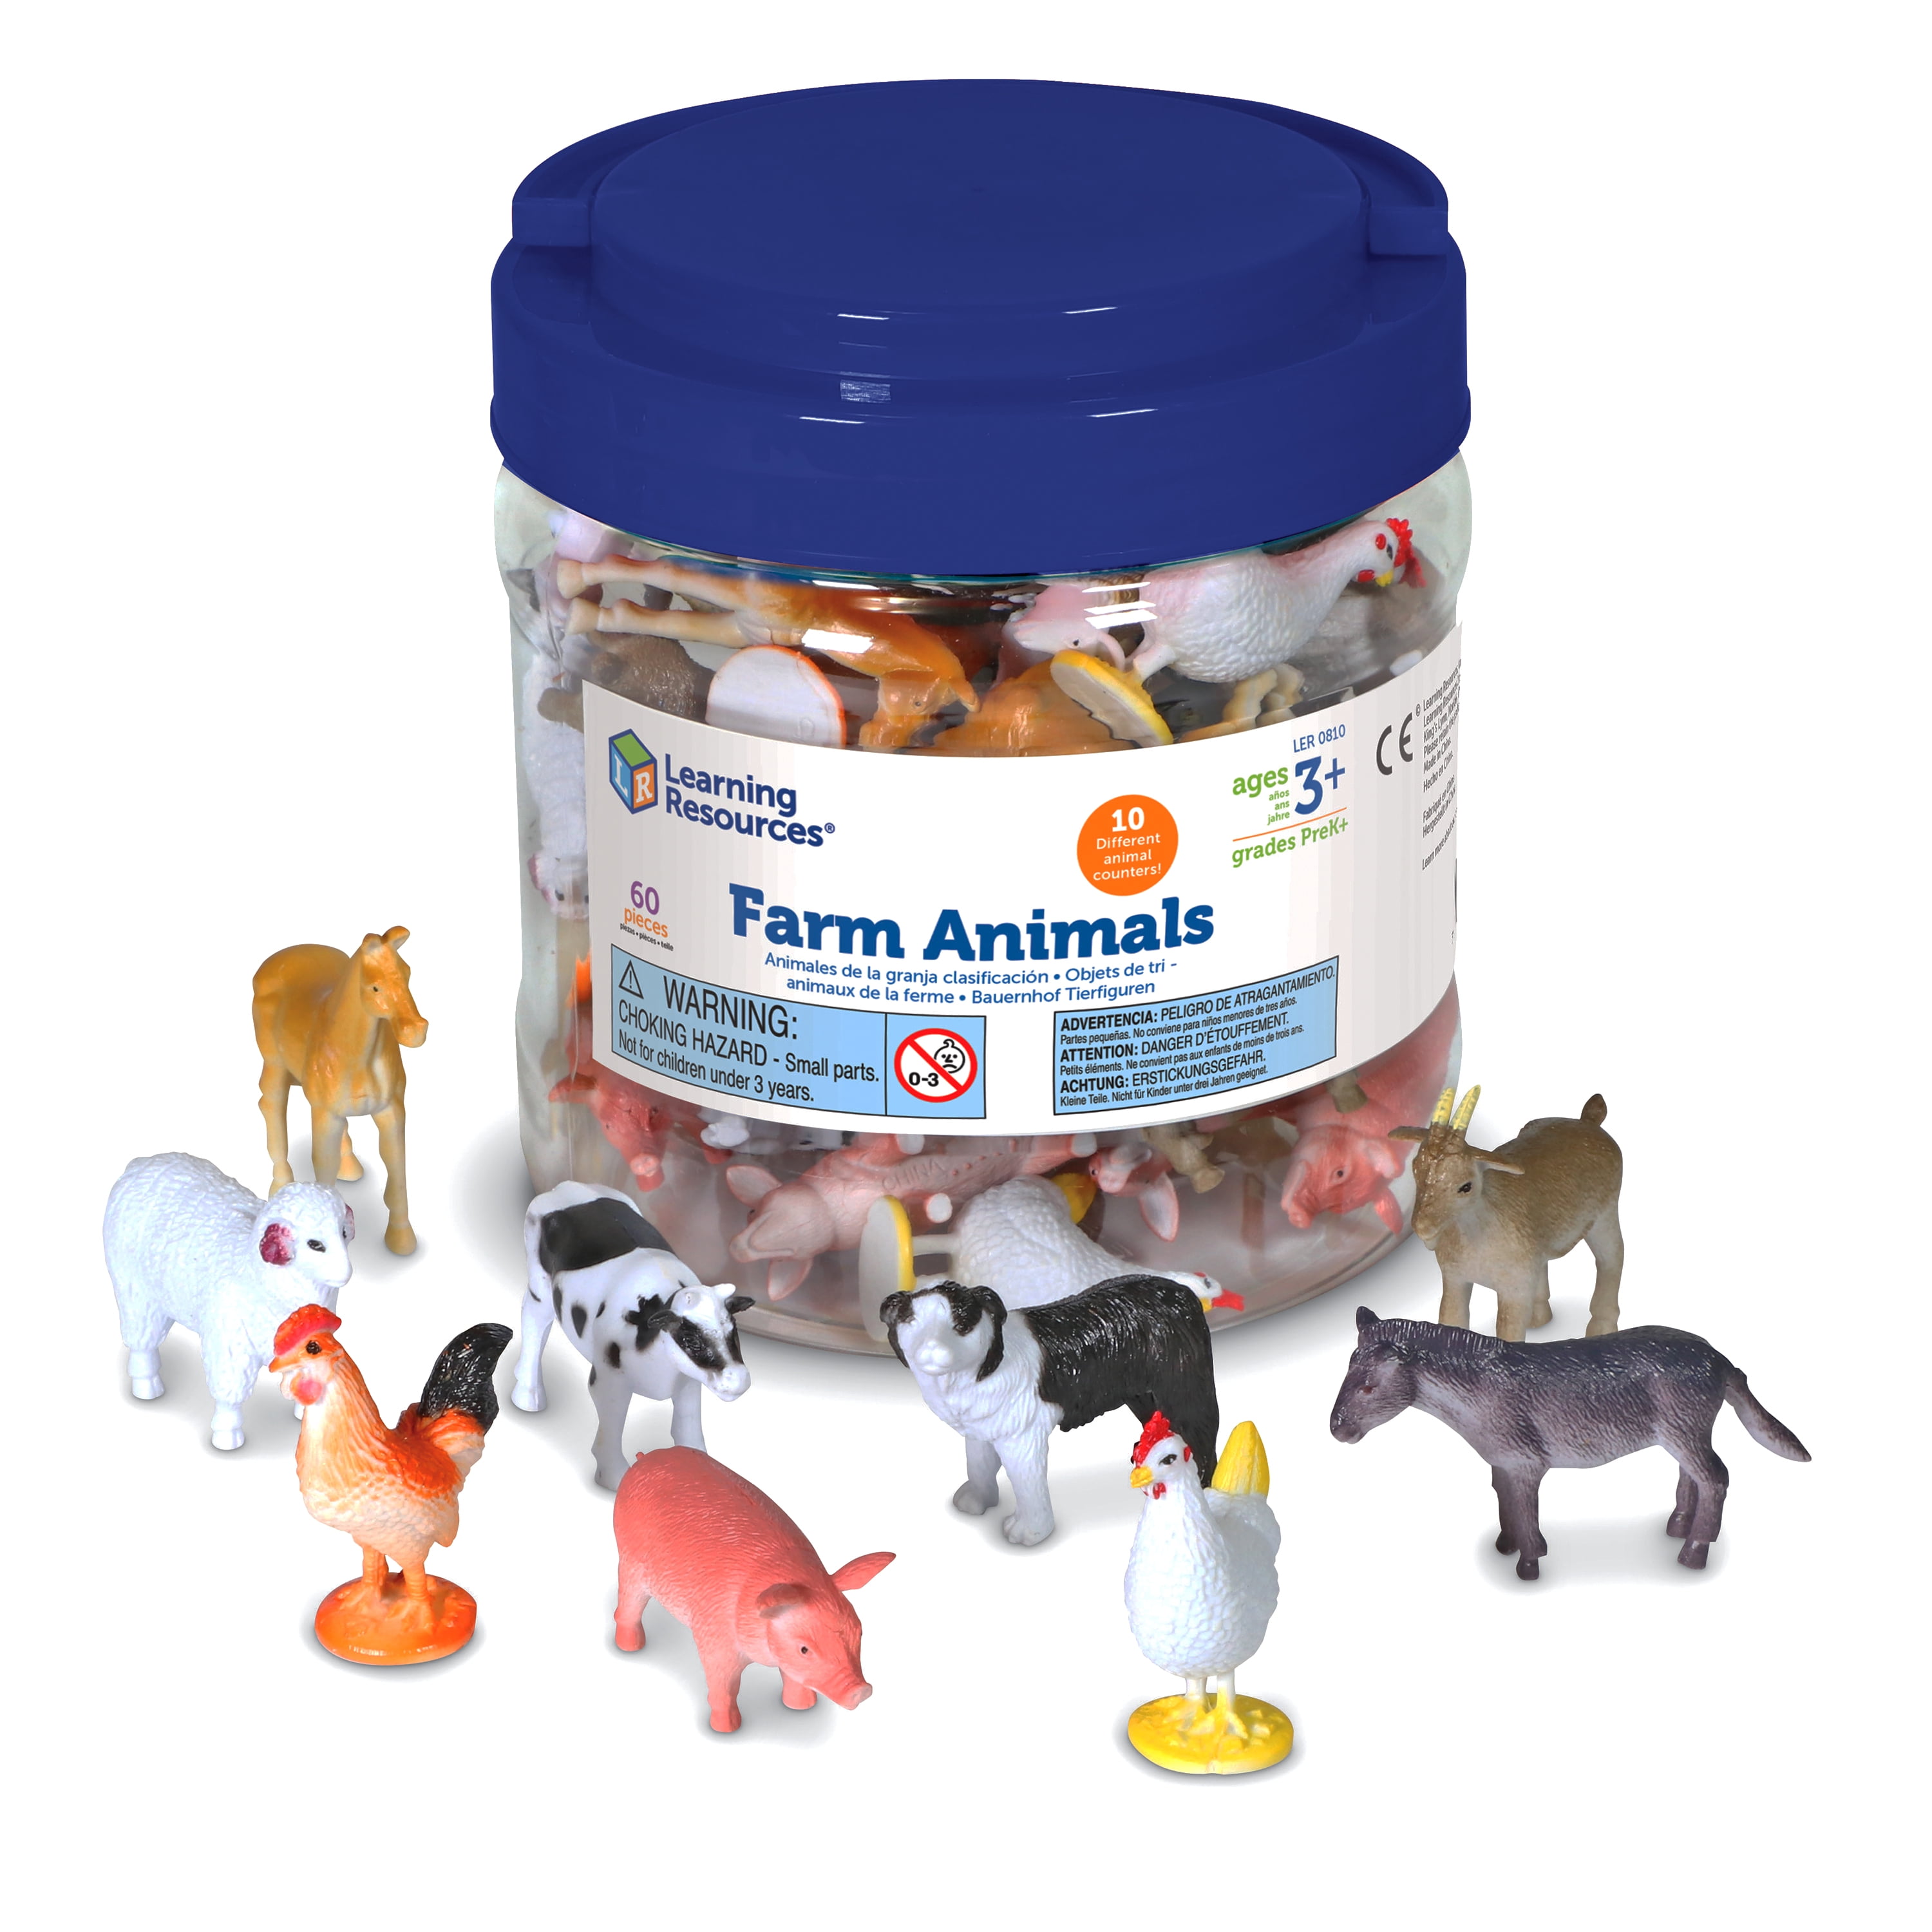 Learning Resources Farm Animal Counters - 60 Pieces, Boys and Girls Ages 3+  Toddler Learning Toys, Farm Animals for Kids 